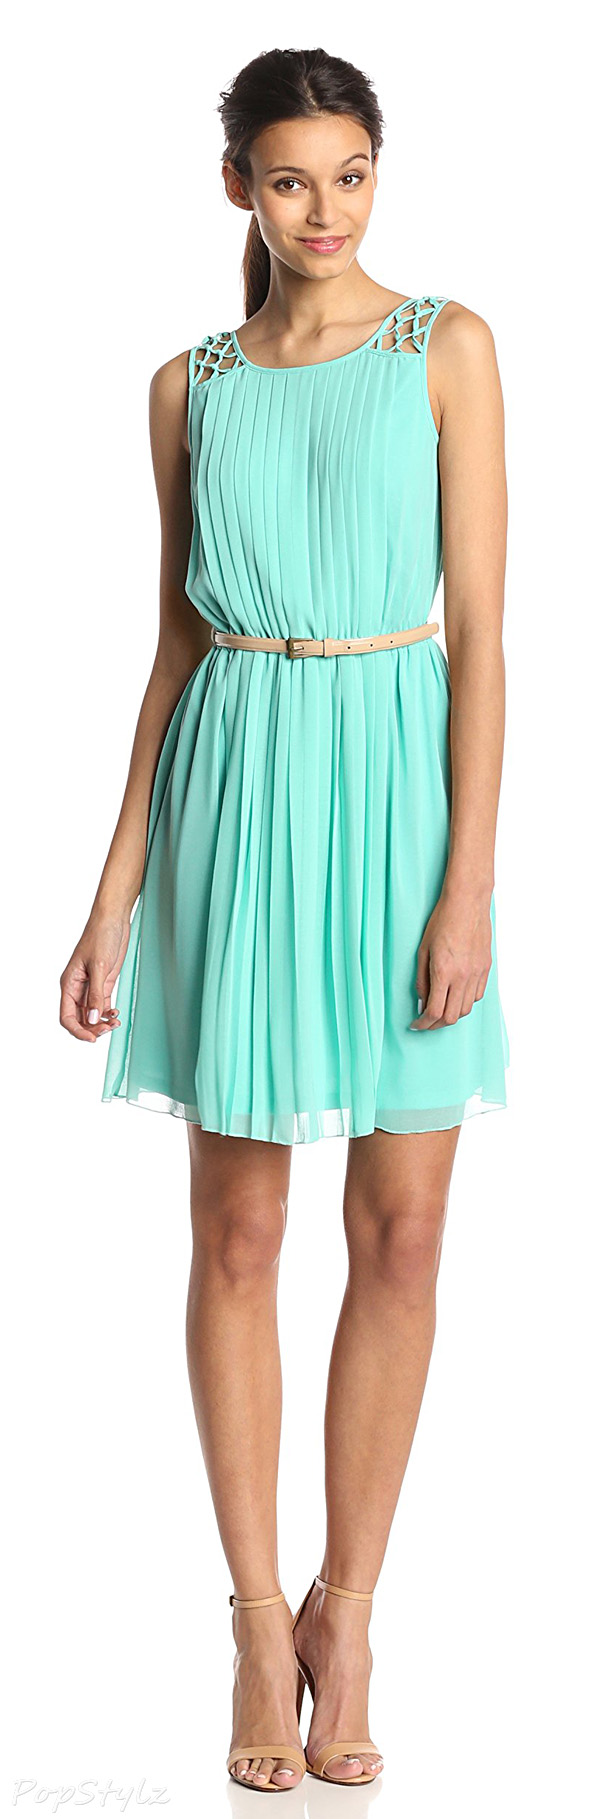 Jessica Simpson Pleated Dress with Shoulder Detail